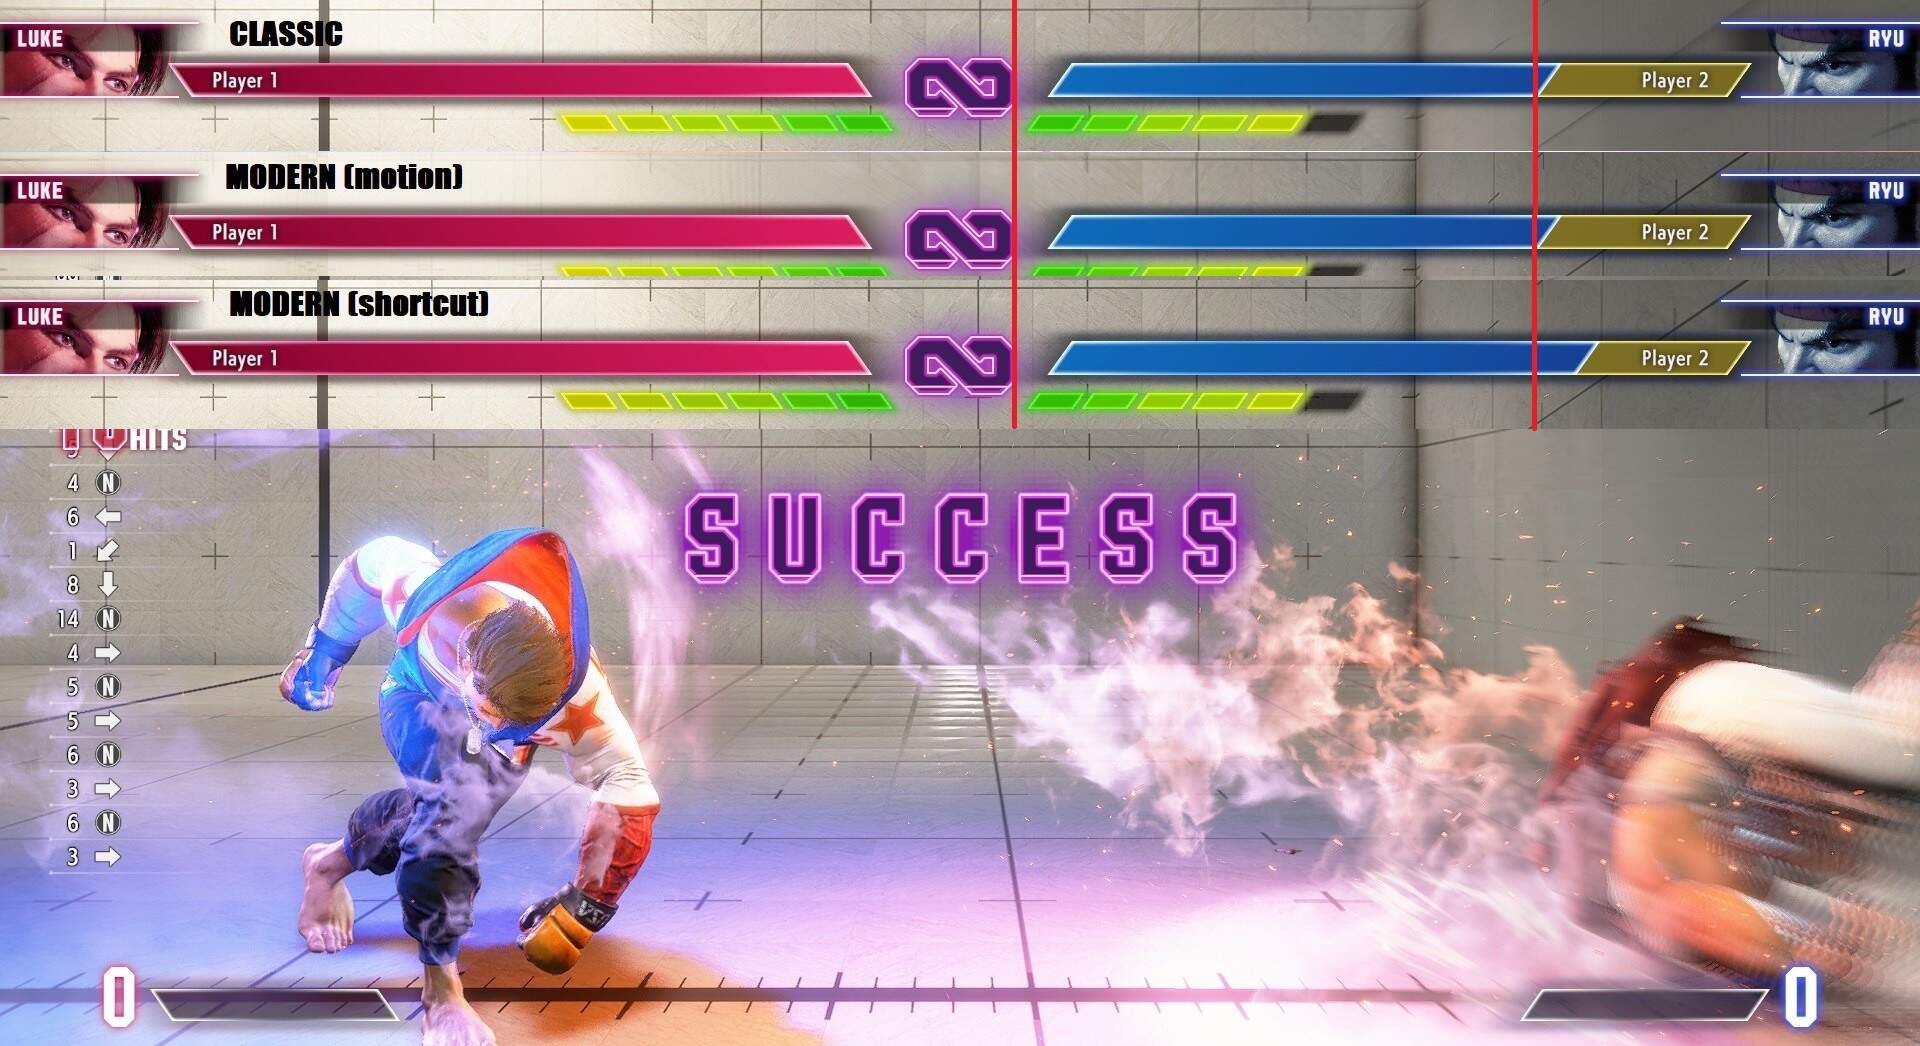 The image shows the difference in damage dealt between Modern Controls, Classic Controls, and using motion inputs with Modern Controls.